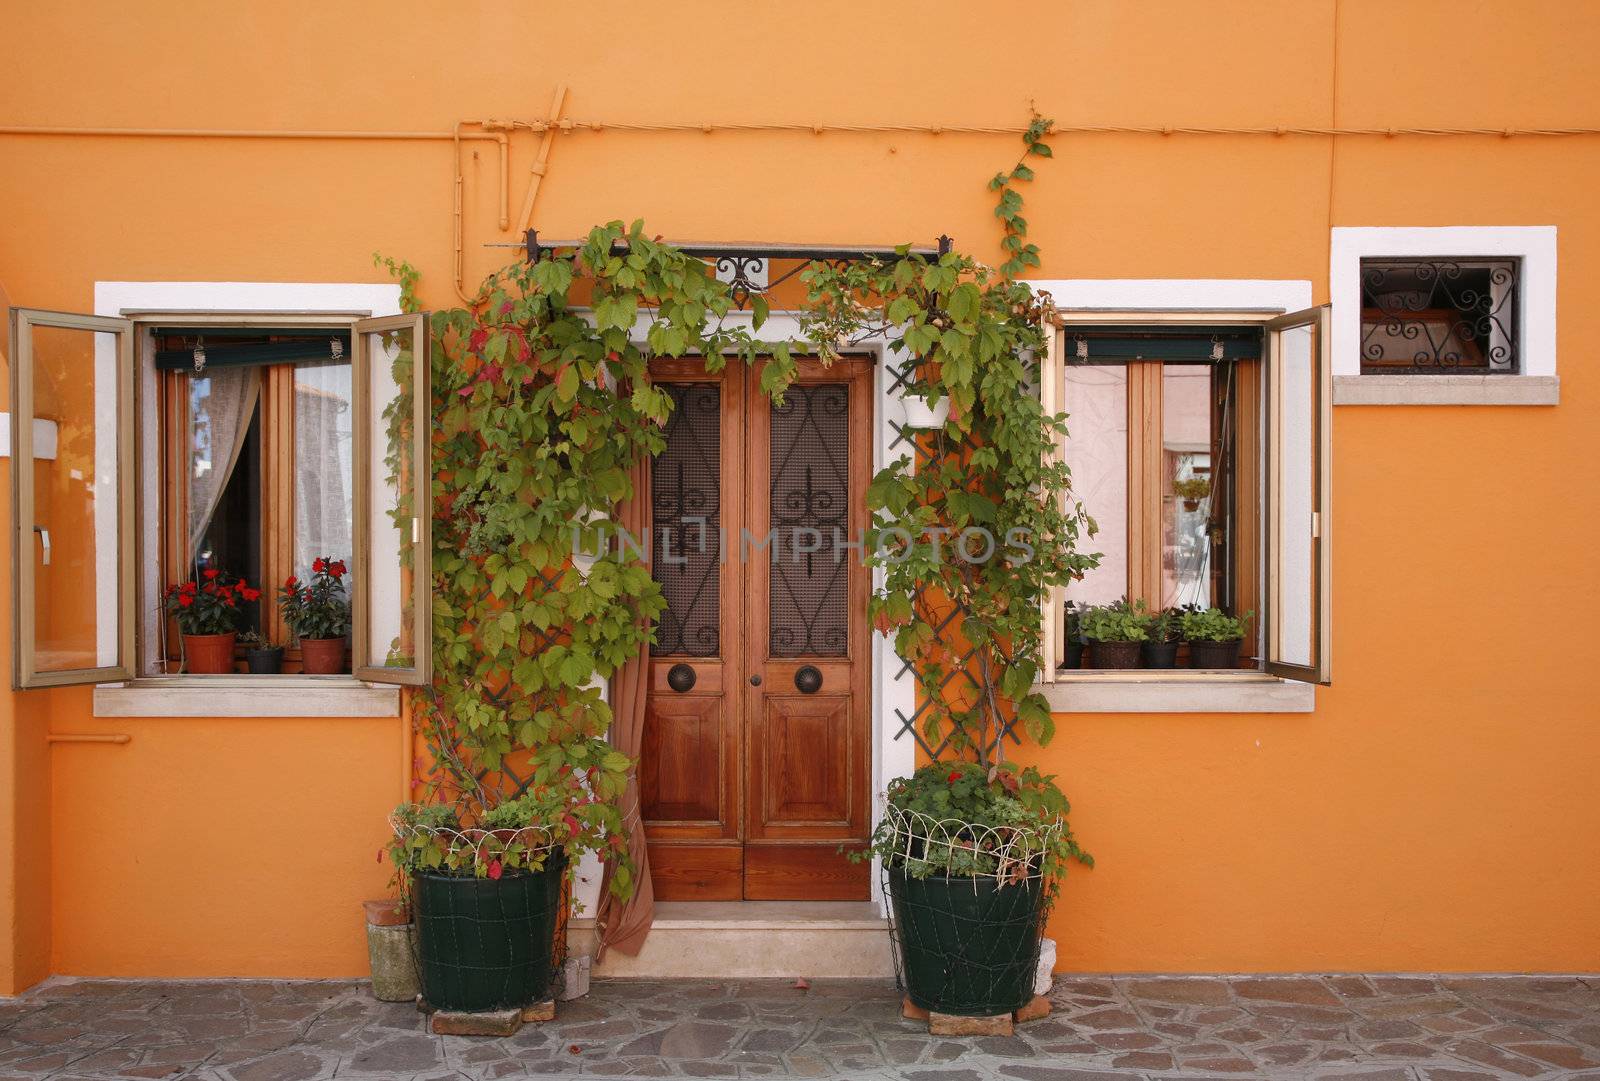 Vibrant house on the island of Burano in the Venetian lagoon - Italy. Just 30 minutes by boat from the centre of the town.